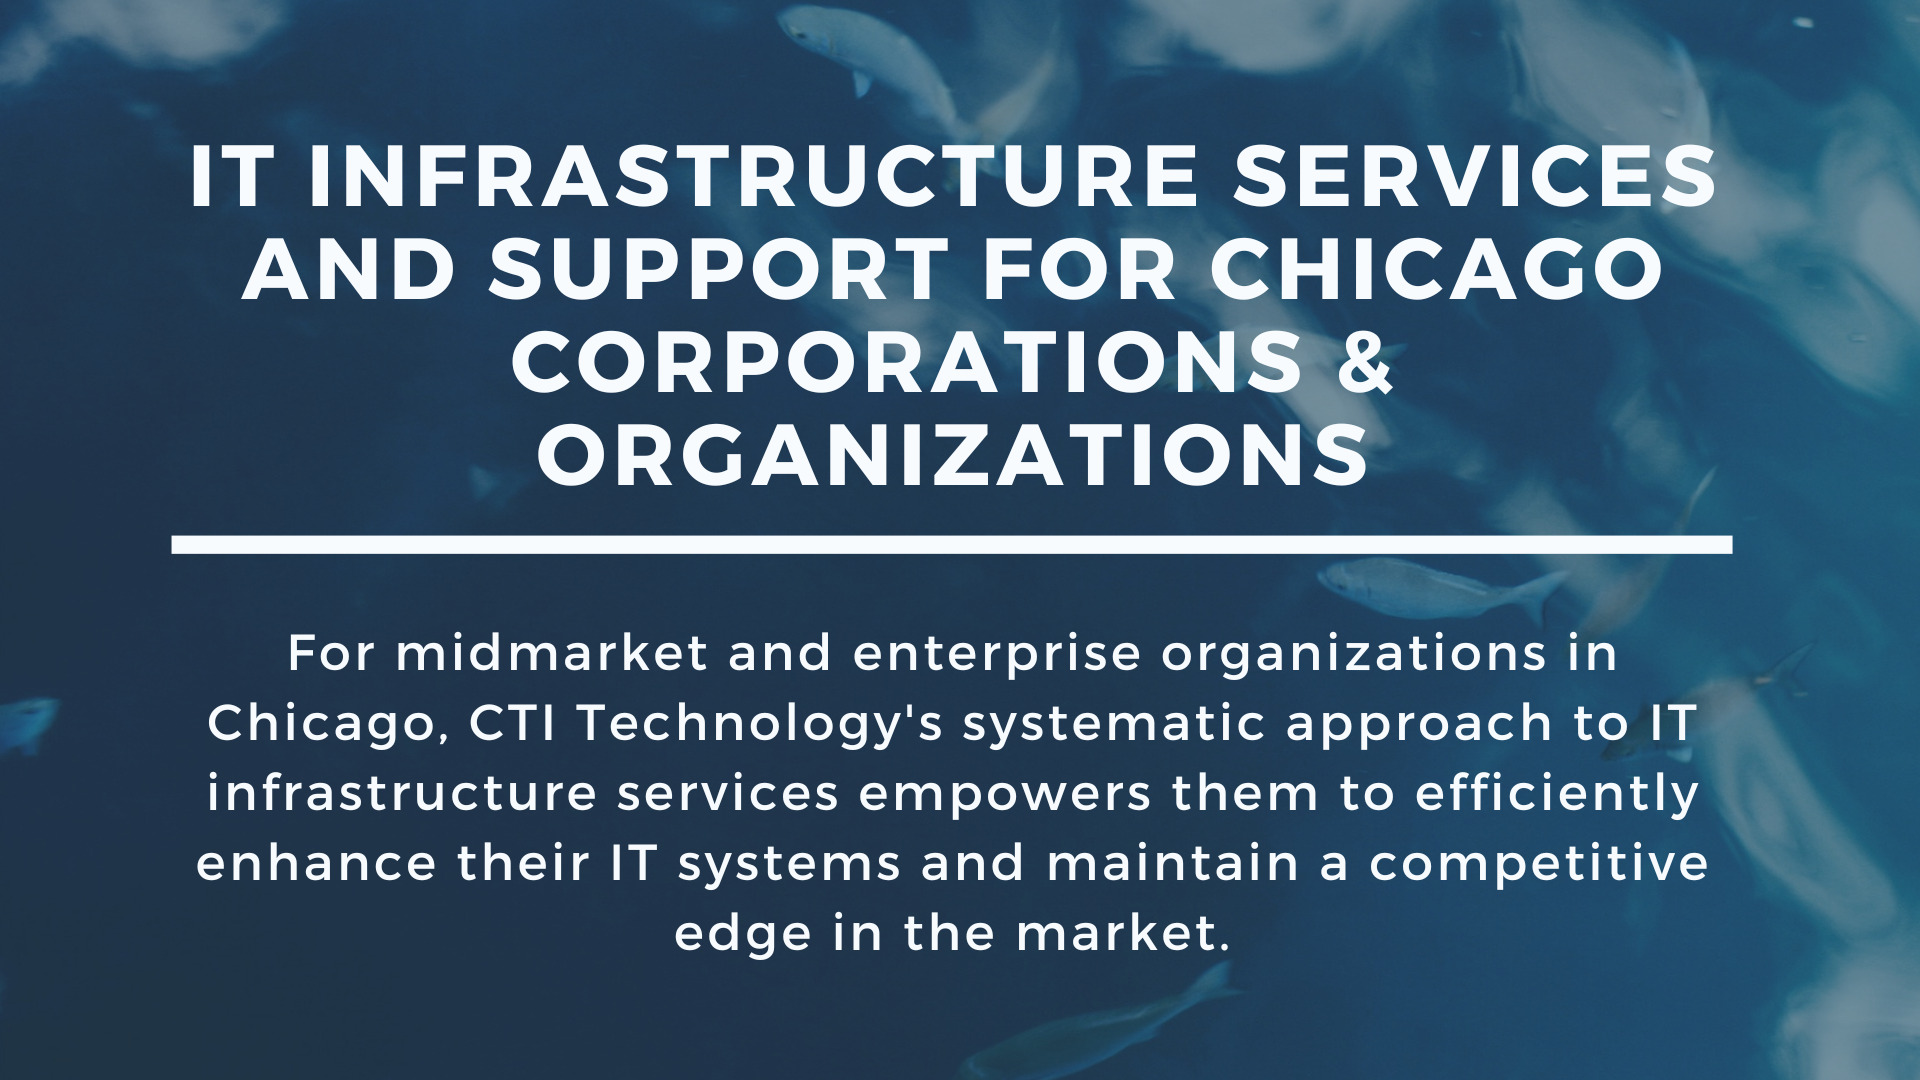 IT Infrastructure Services and Support Chicago Corporations & Organizations